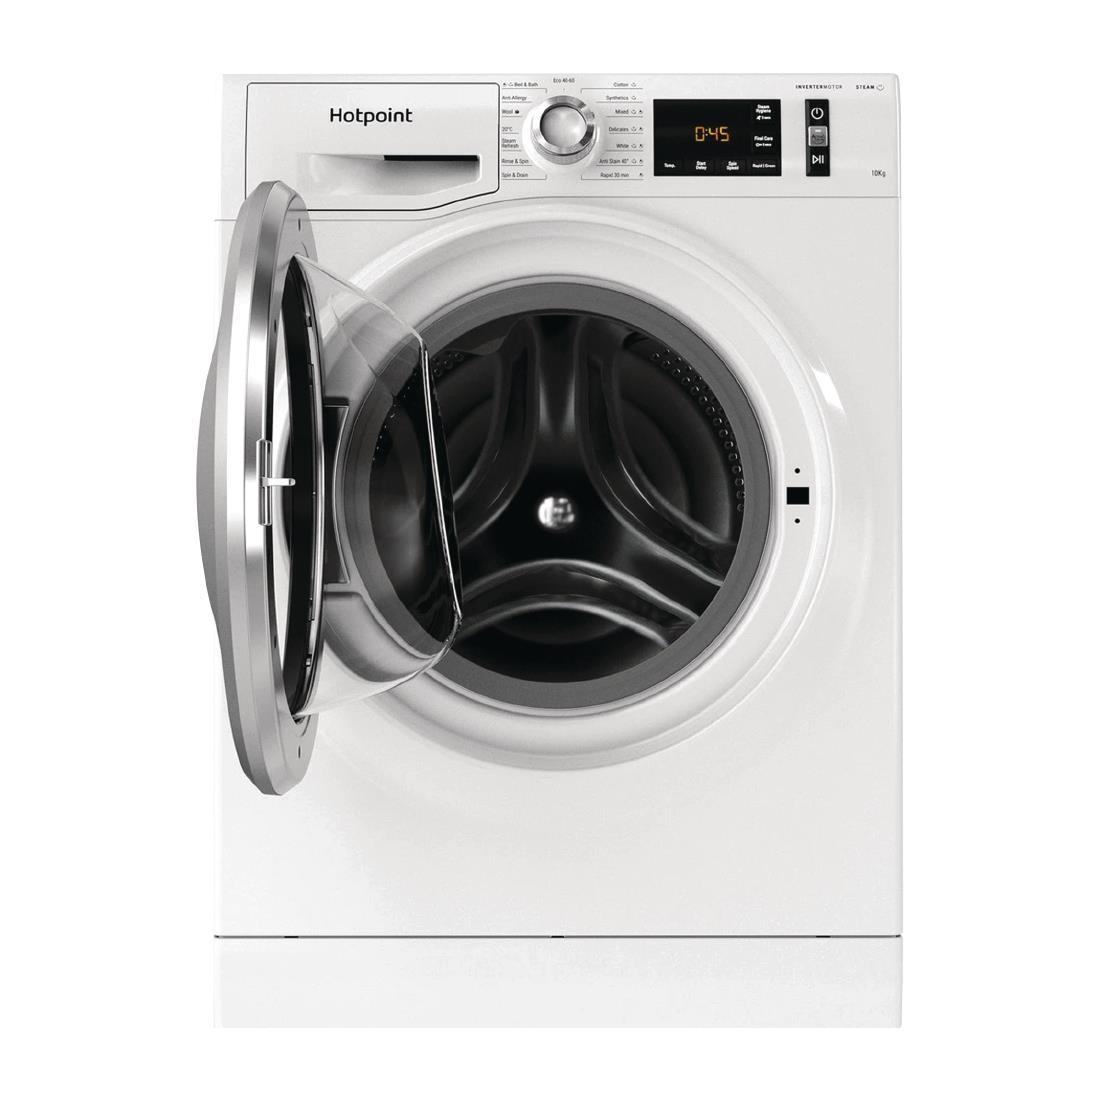 Hotpoint ActiveCare Washing Machine NM11 1045 WC A - DC974  - 2